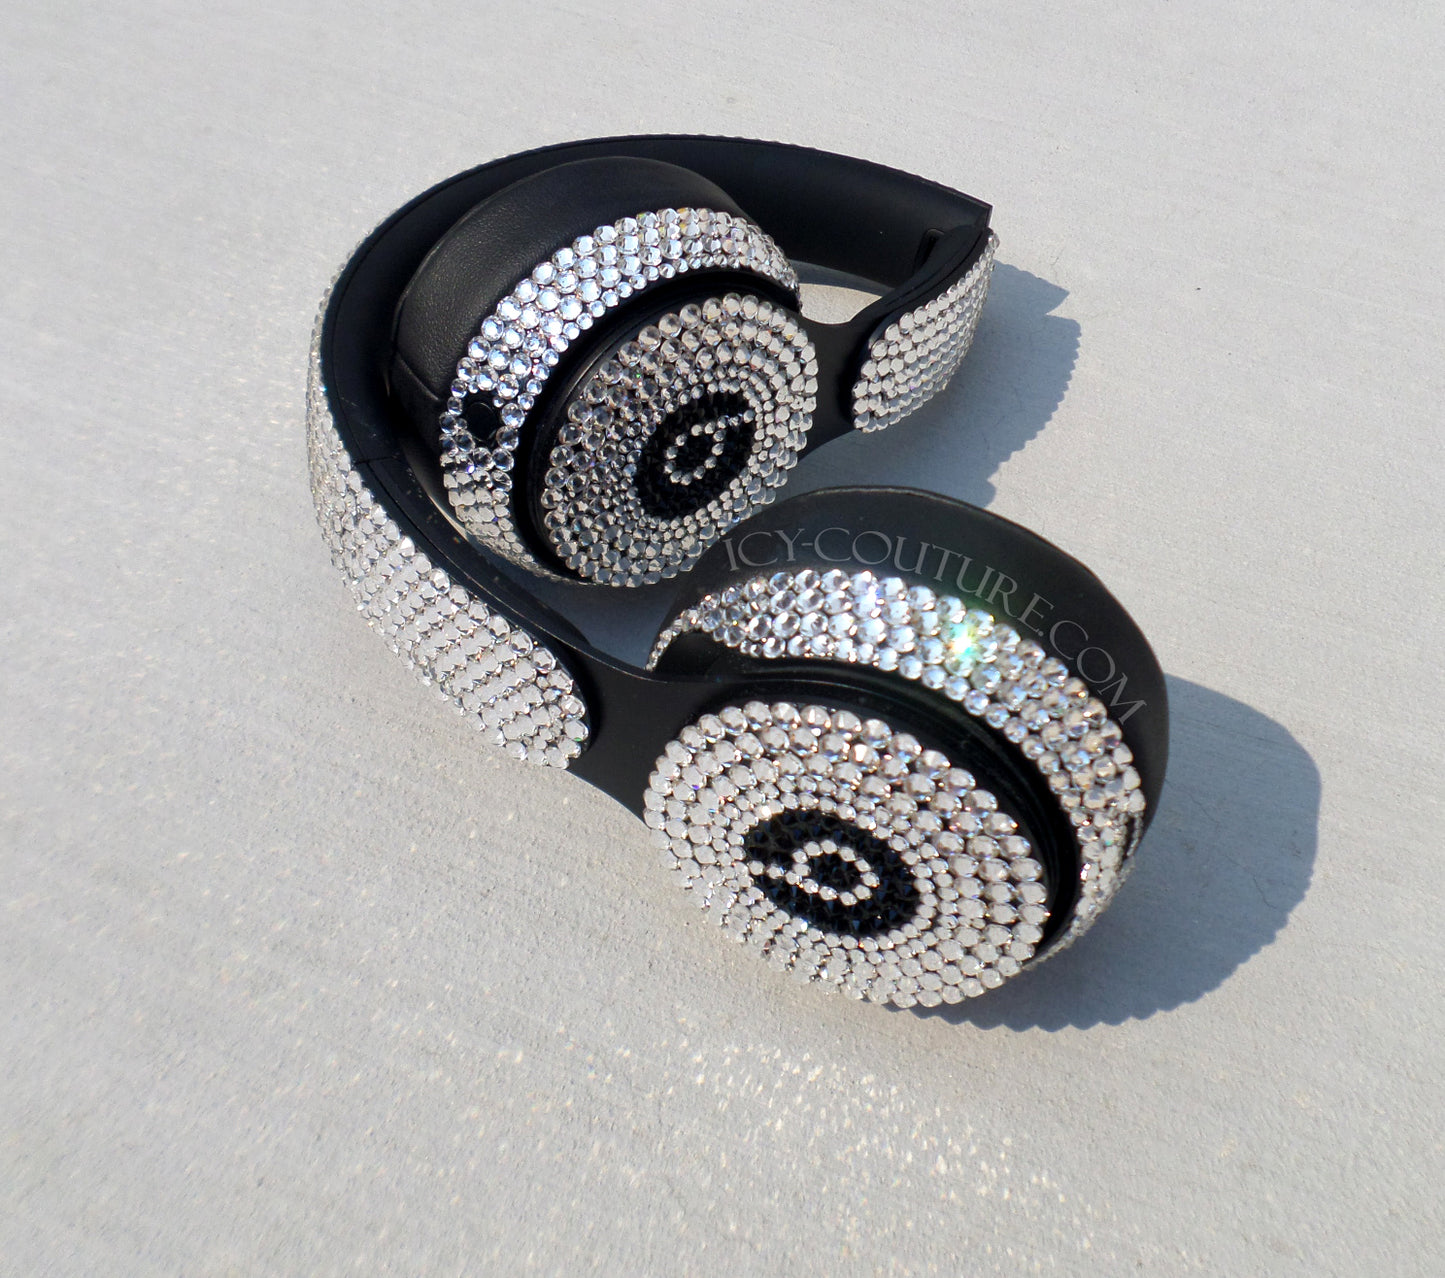 Clear and Black Bedazzled Bling Beats Headphones custom crystallized with Swarovski Crystals or Premium Glass Rhinestones | ICY Couture